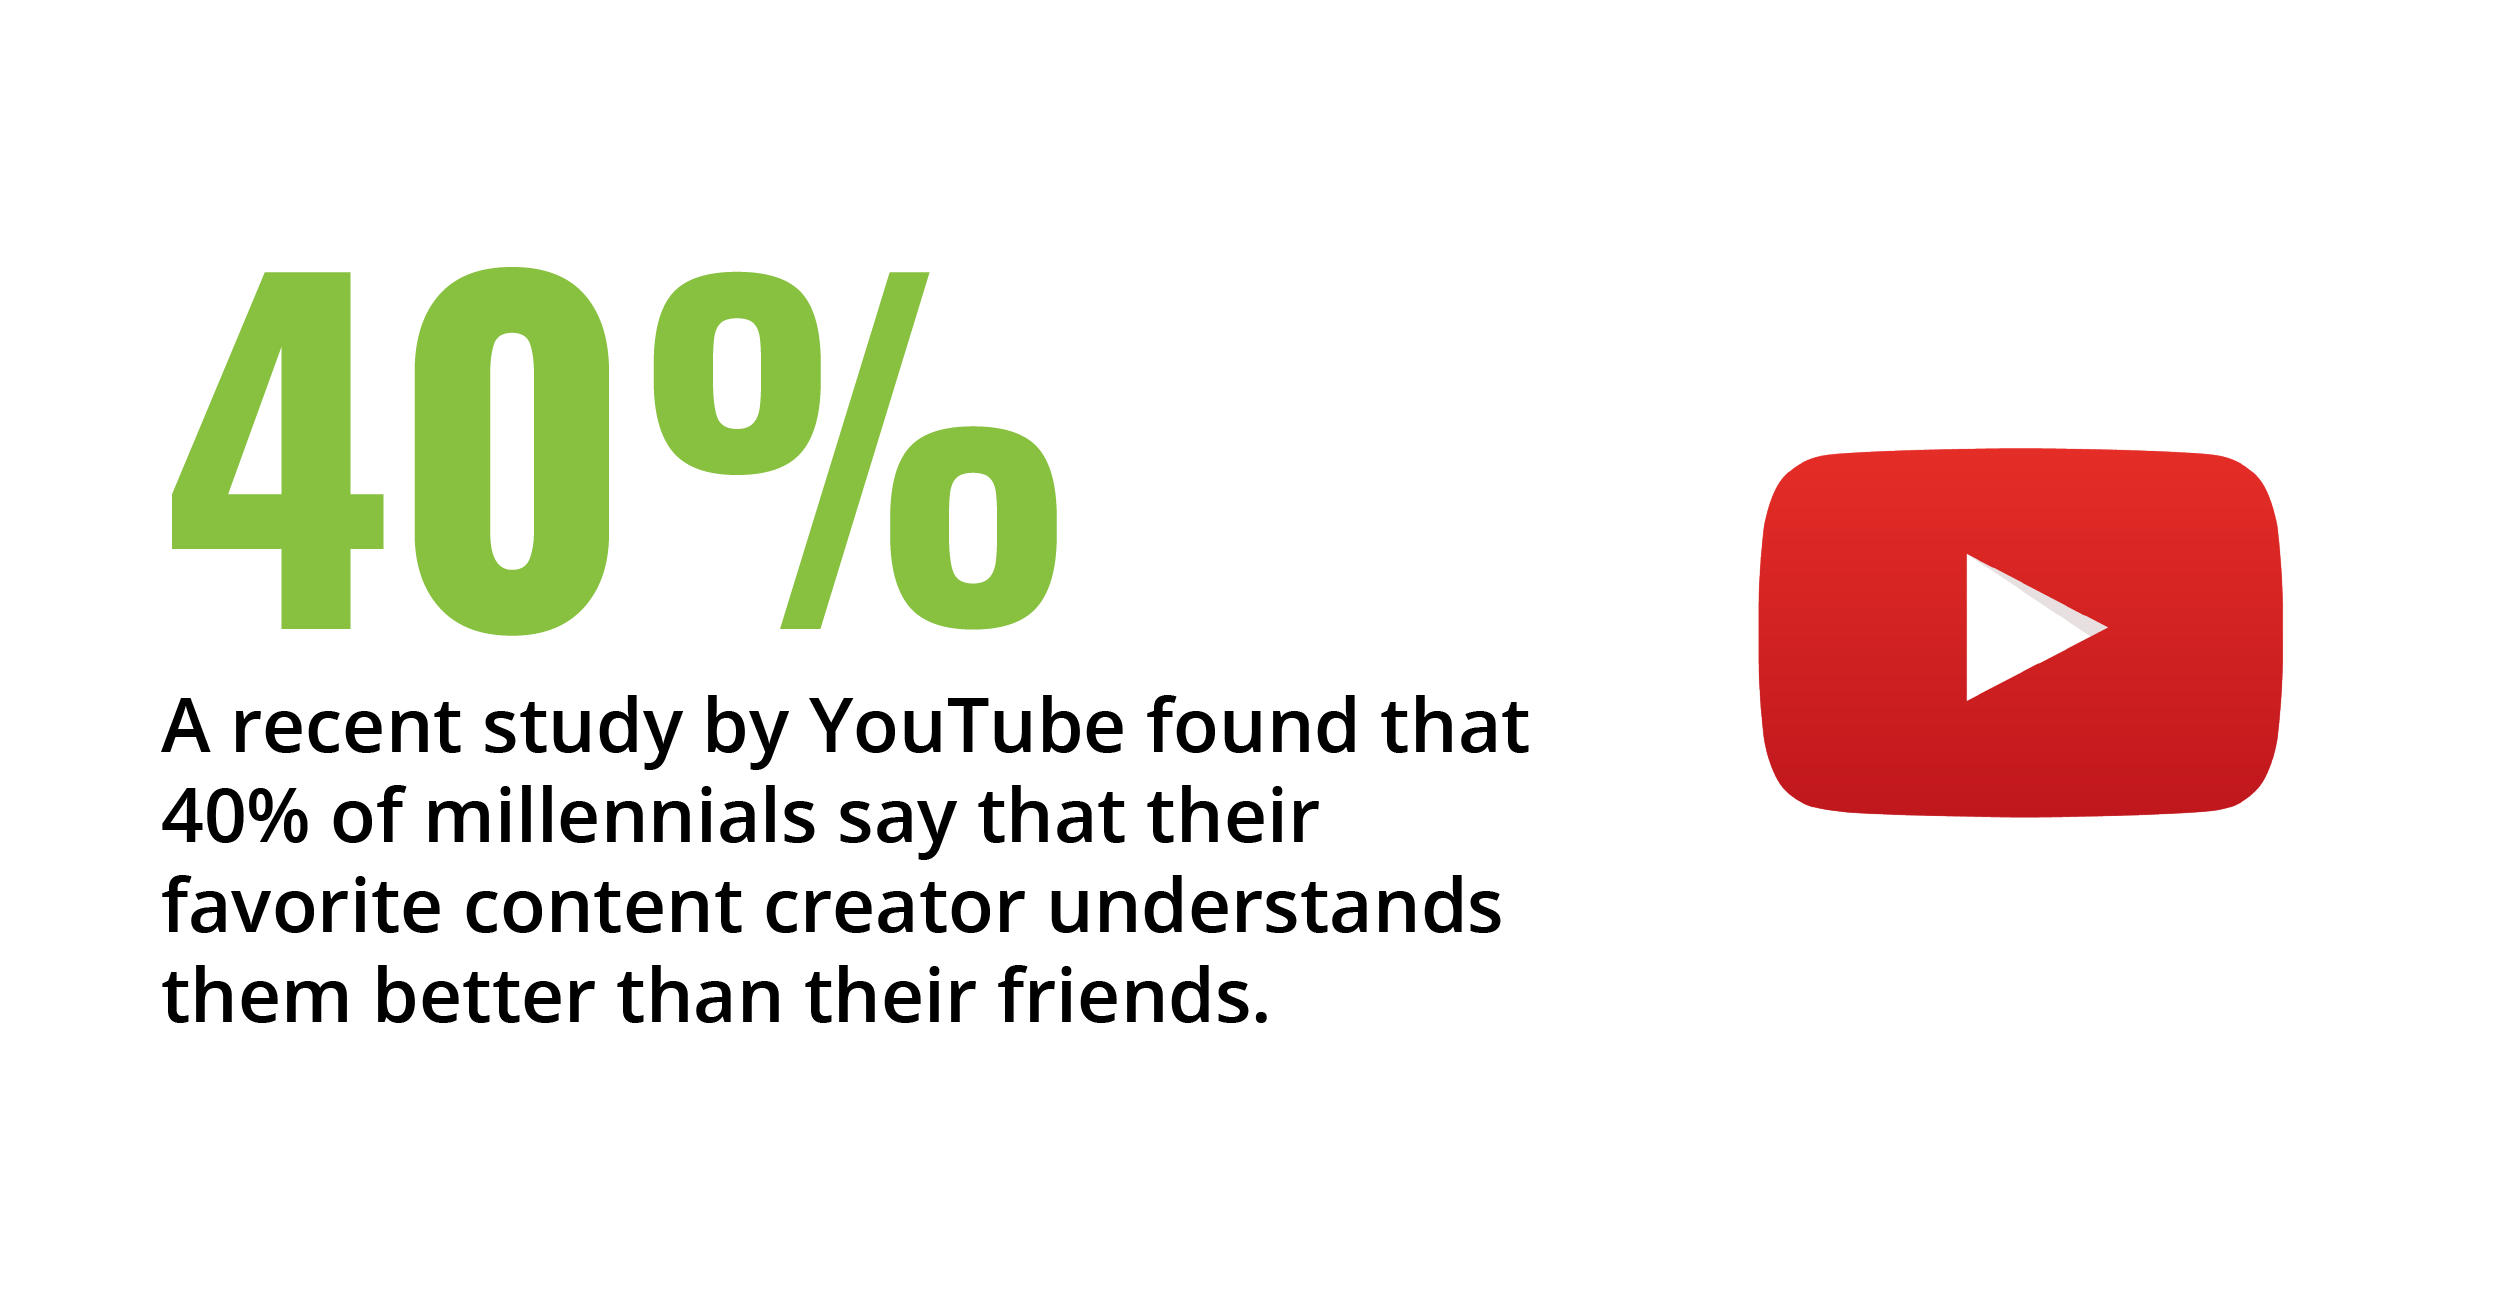 A recent study by YouTube found that 40% of millennials say that their favorite content creator understands them better than their friends.